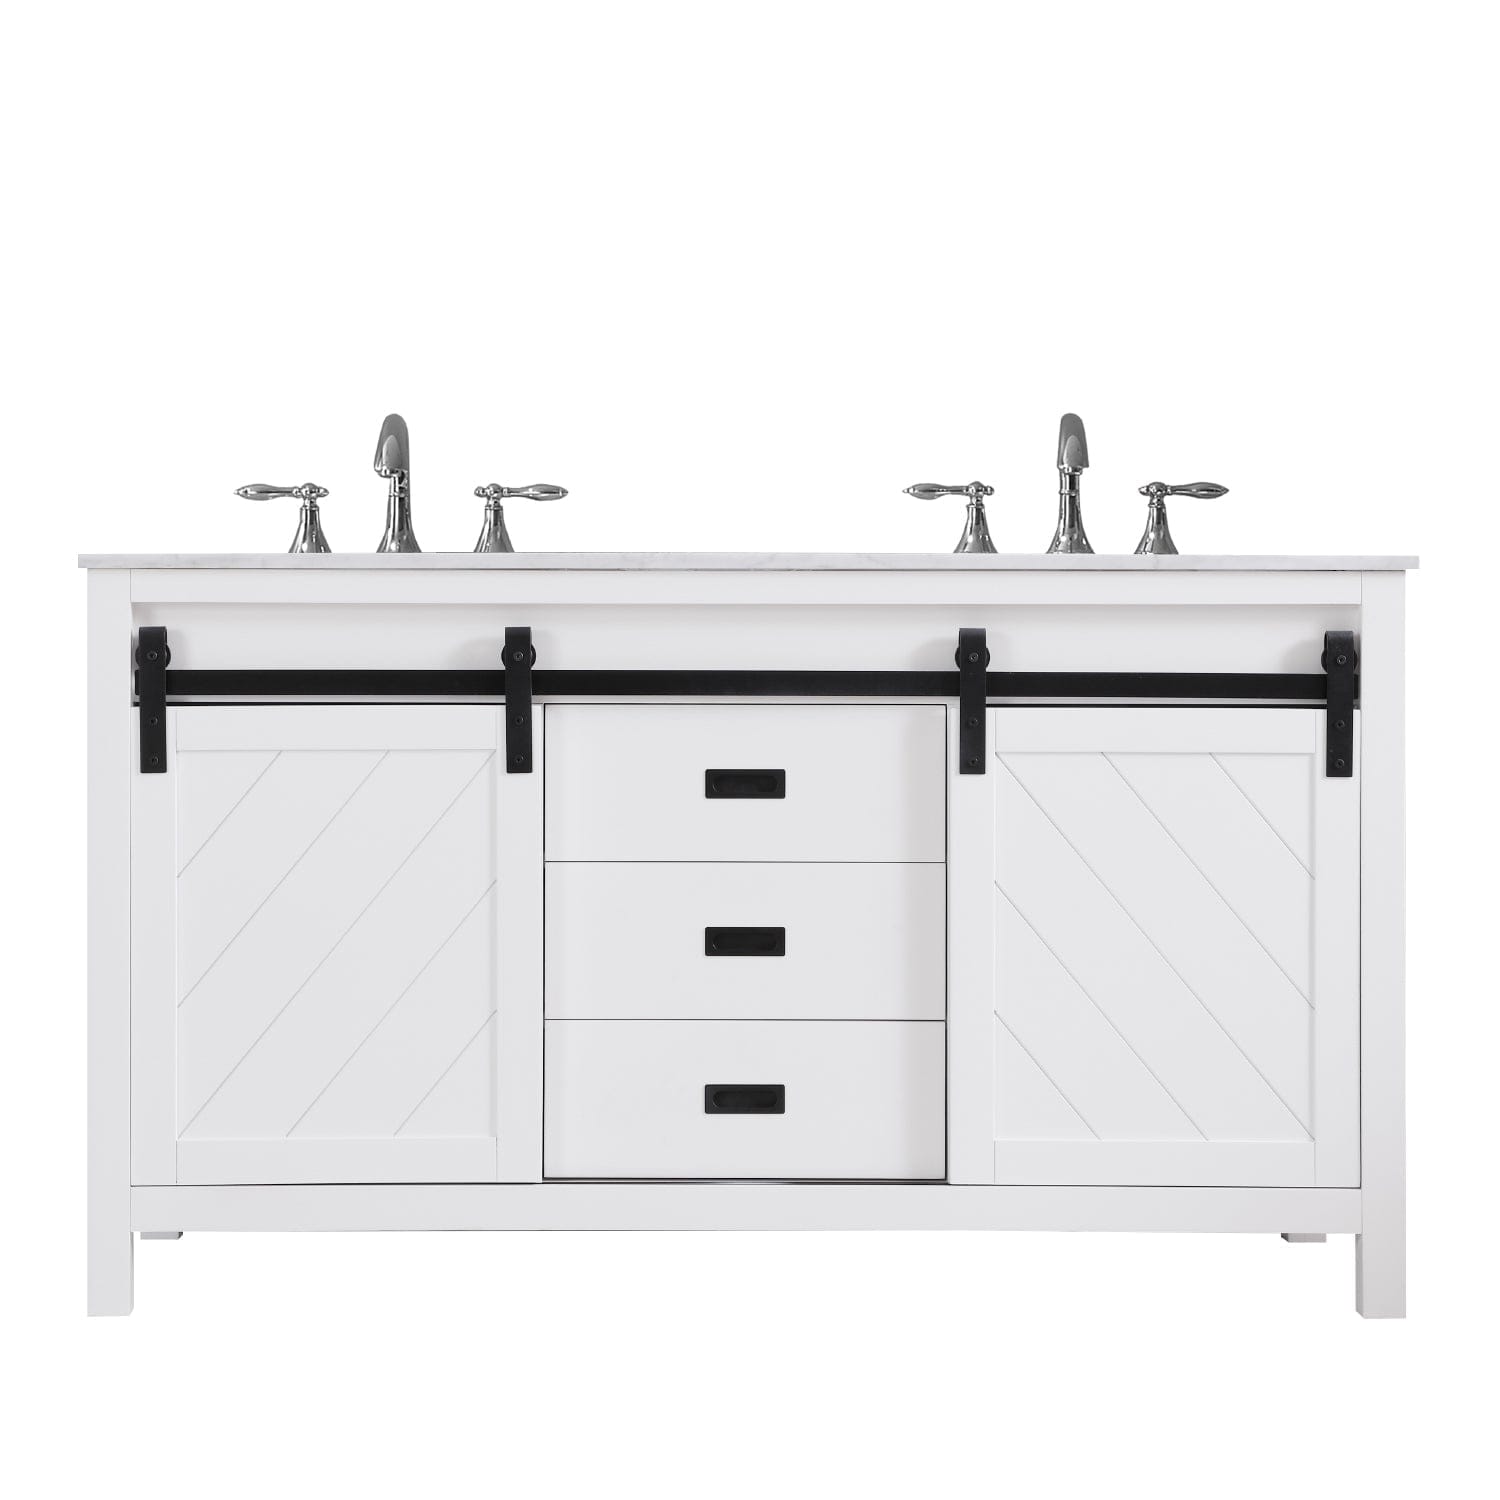 Altair Kinsley 60" Double Bathroom Vanity Set in White and Carrara White Marble Countertop without Mirror 536060-WH-CA-NM - Molaix631112970549Vanity536060-WH-CA-NM